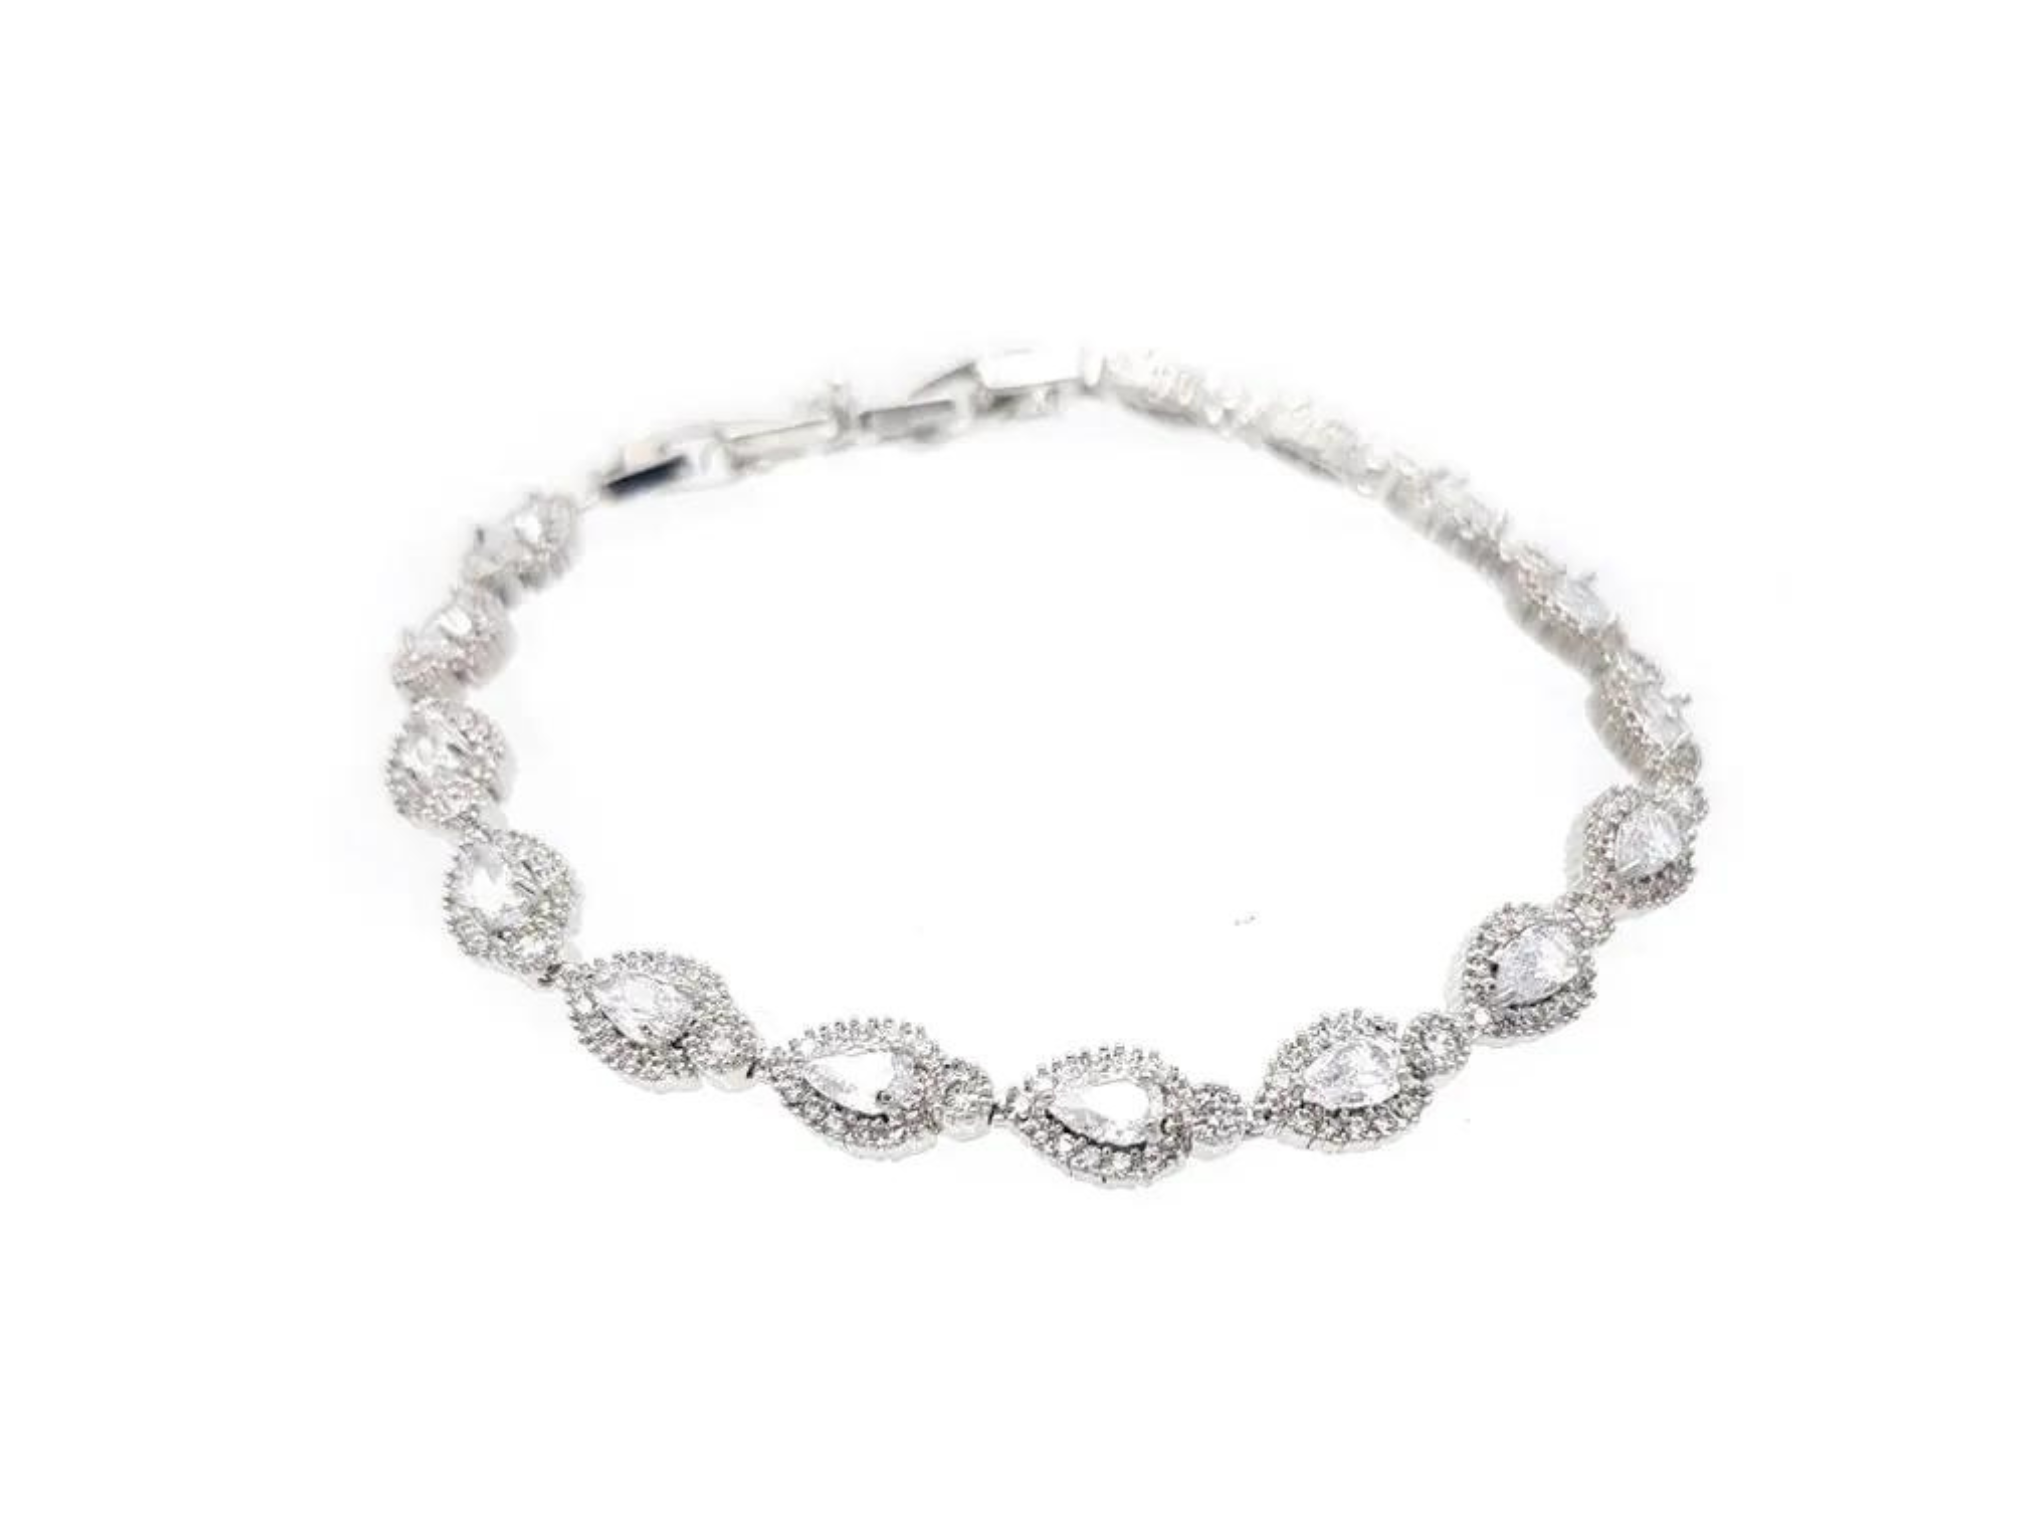 Larissa - Delicate Marquise and Round Crystal Bridal Bracelet